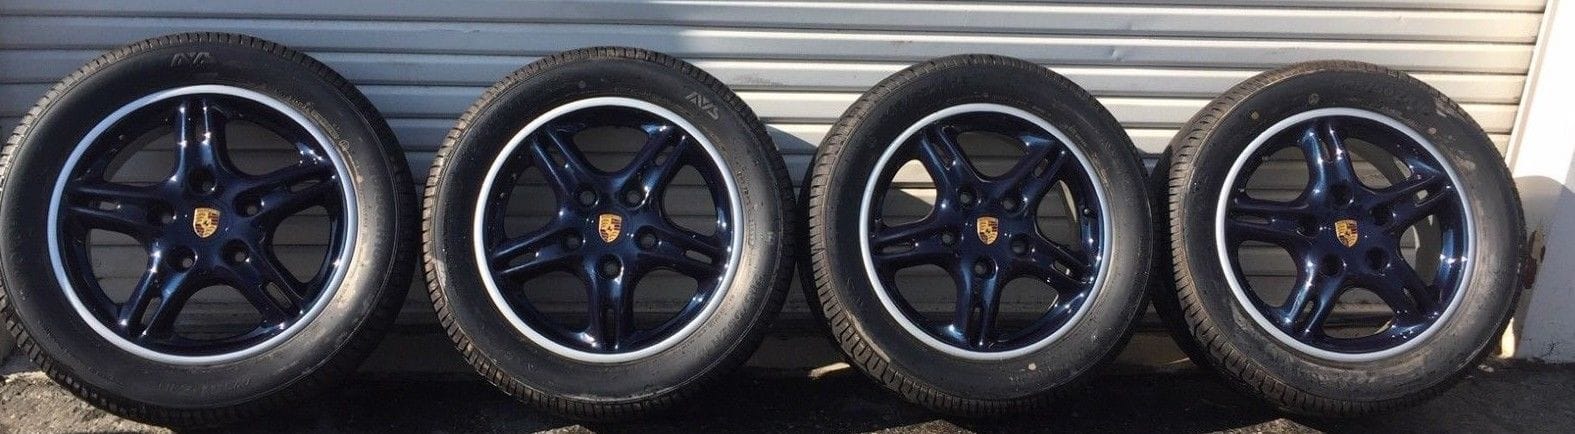 Wheels and Tires/Axles - Boxster Wheels(98-03)996.362.112.00 /114.00 6Jx16 ET50 /7Jx16 ET40 OEM (Front & Rear) - Used - 1998 to 2003 Porsche Boxster - Tustin, CA 92780, United States